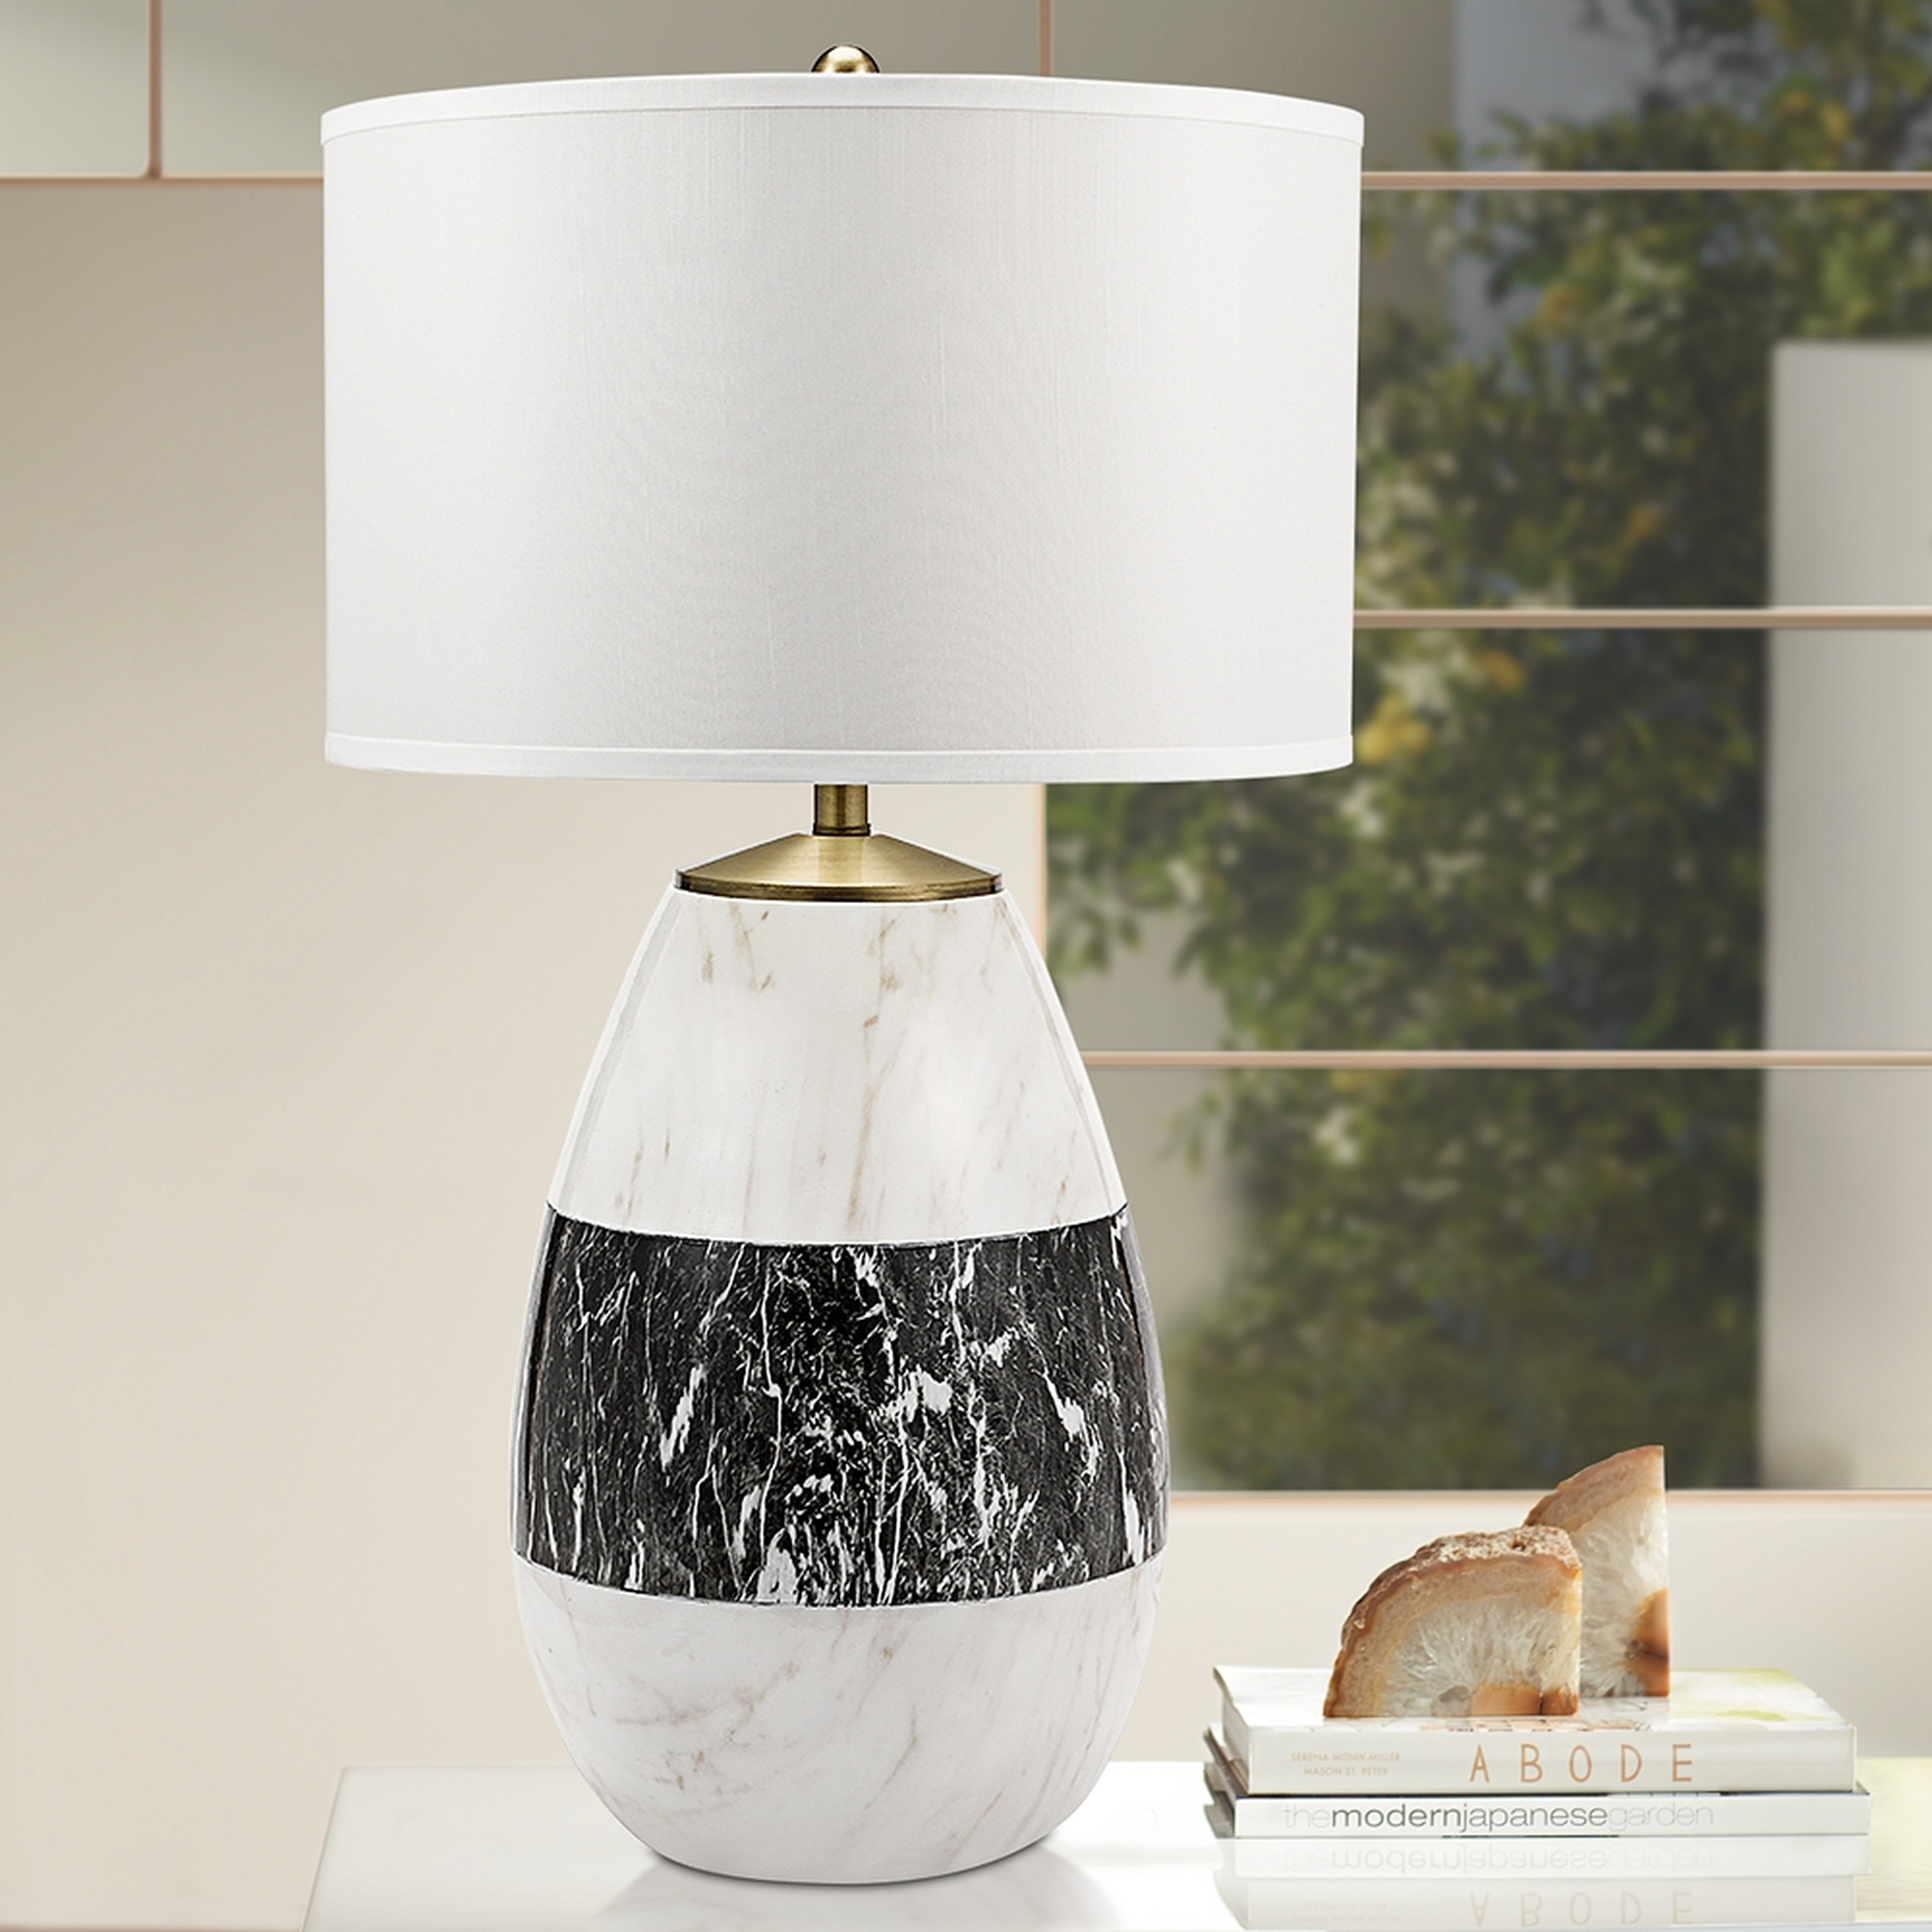 Fabiana Black and White Striped Gourd LED Table Lamp - Style # 82J07 - Lamps Plus